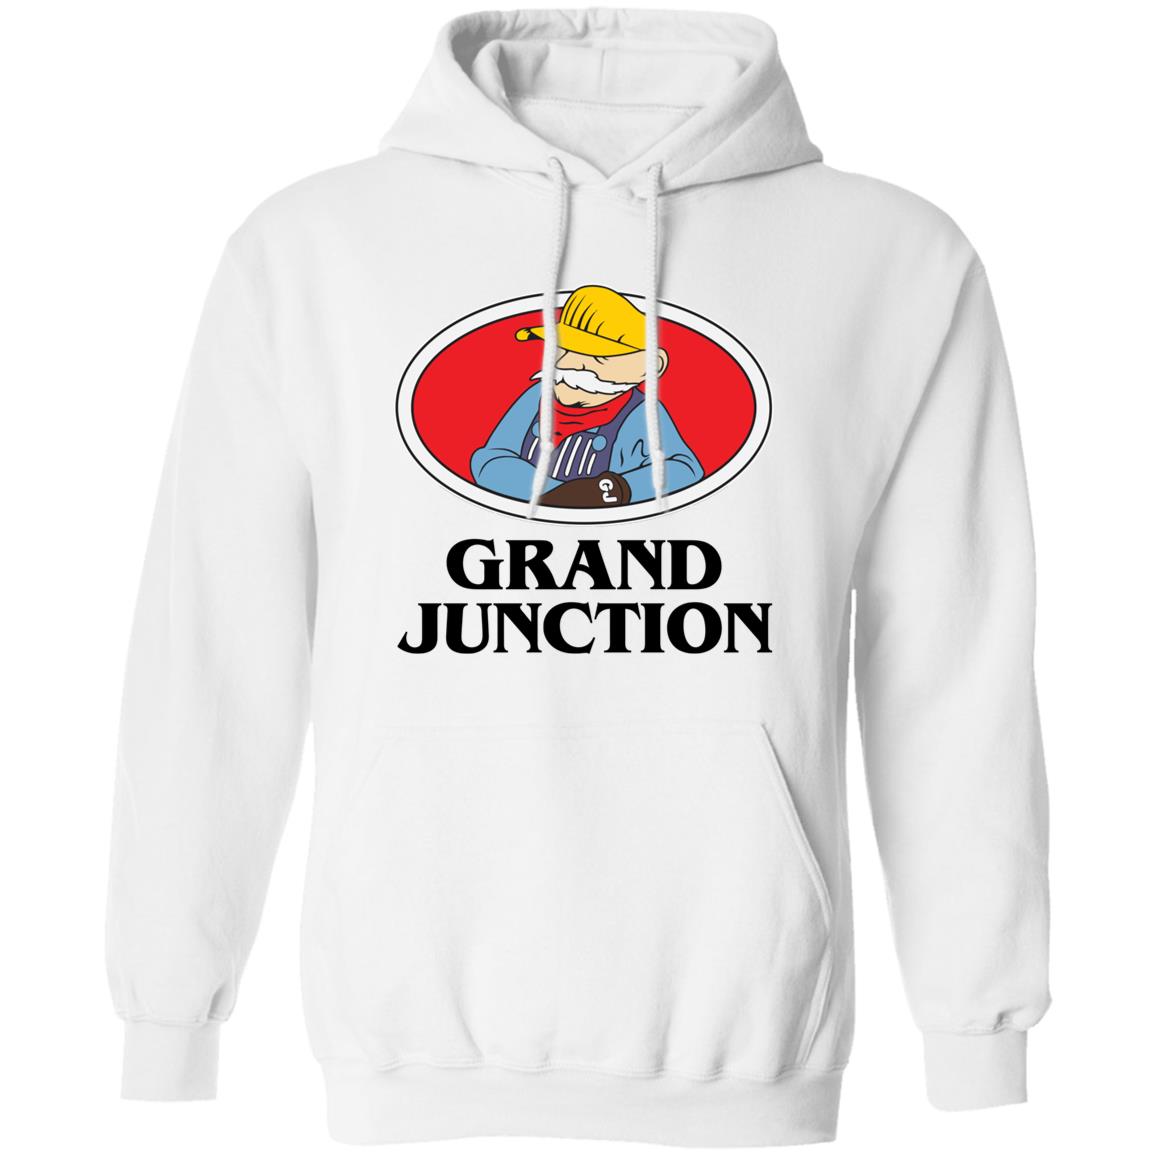 Grand Junction Grilled Subs Shirt 2